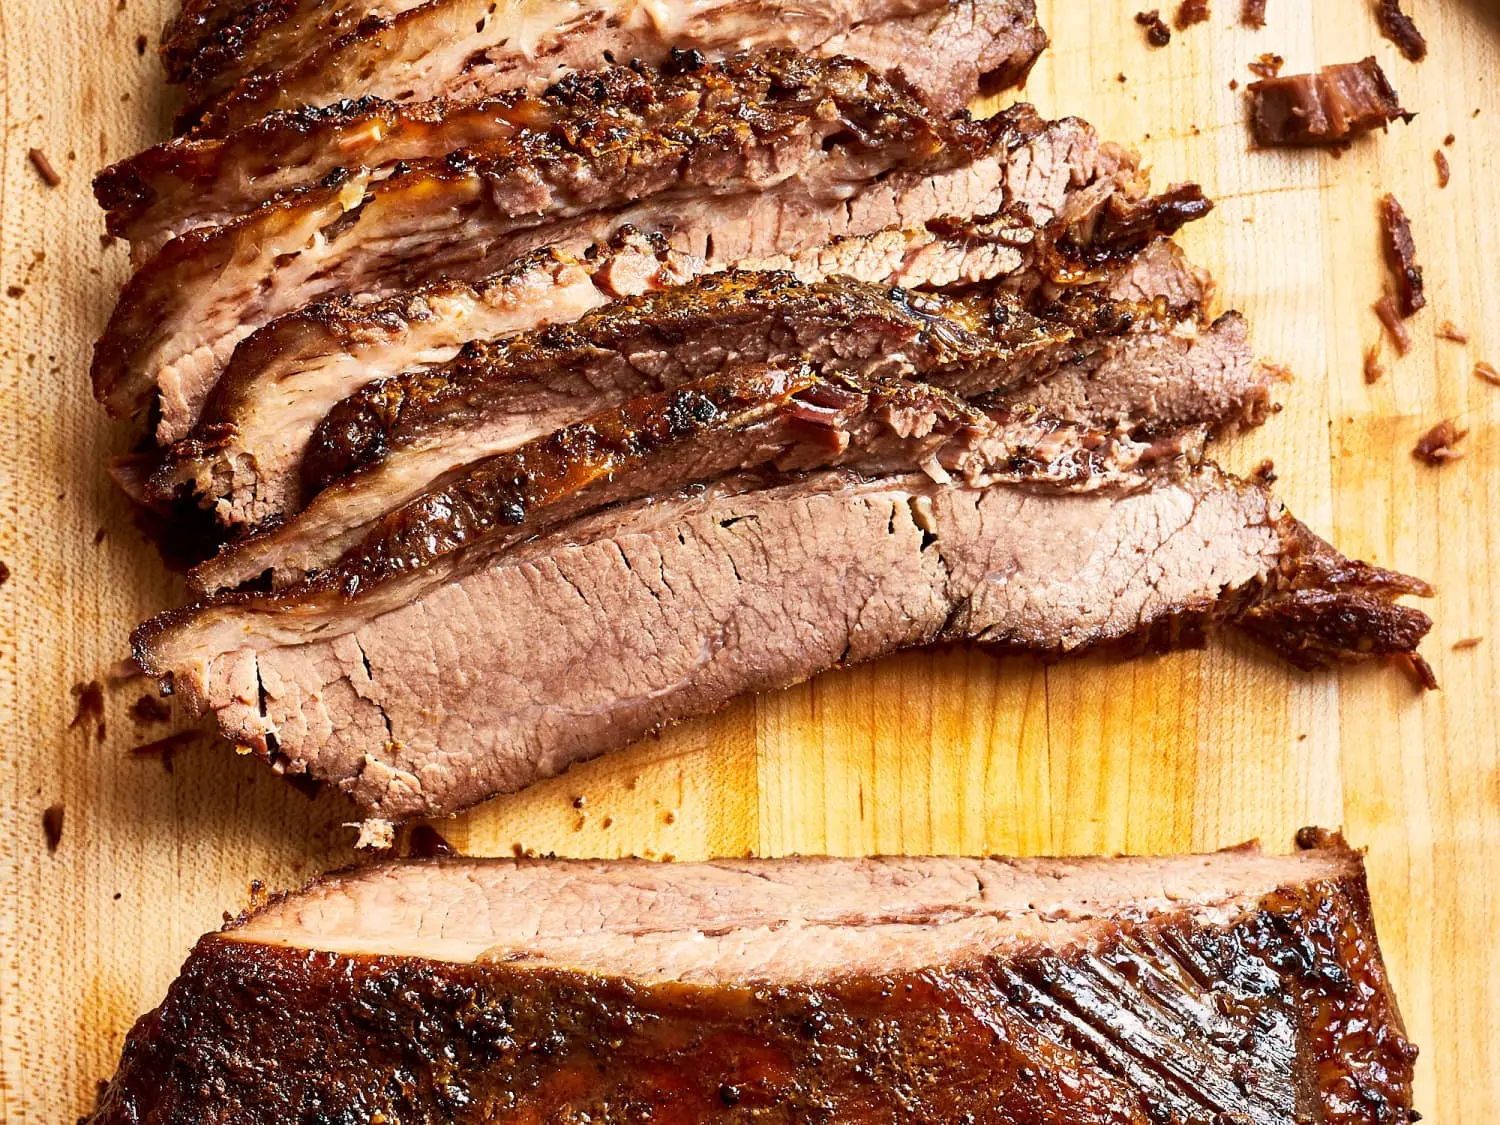 oven smoked brisket - How long to cook brisket in oven at 225 degrees